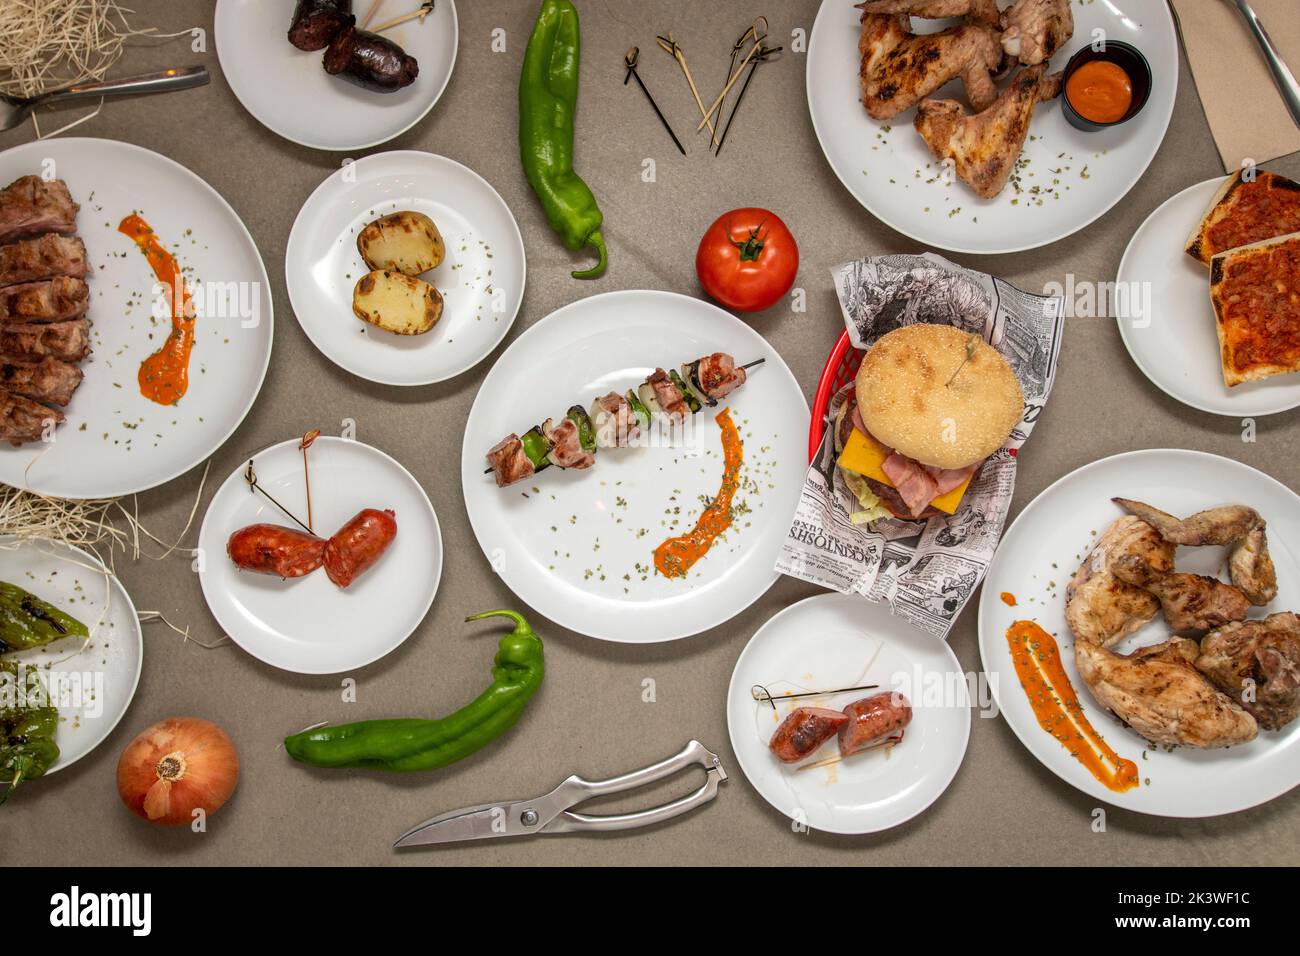 Set of white plates with charcoal grilled food, both vegetables and meat Stock Photo